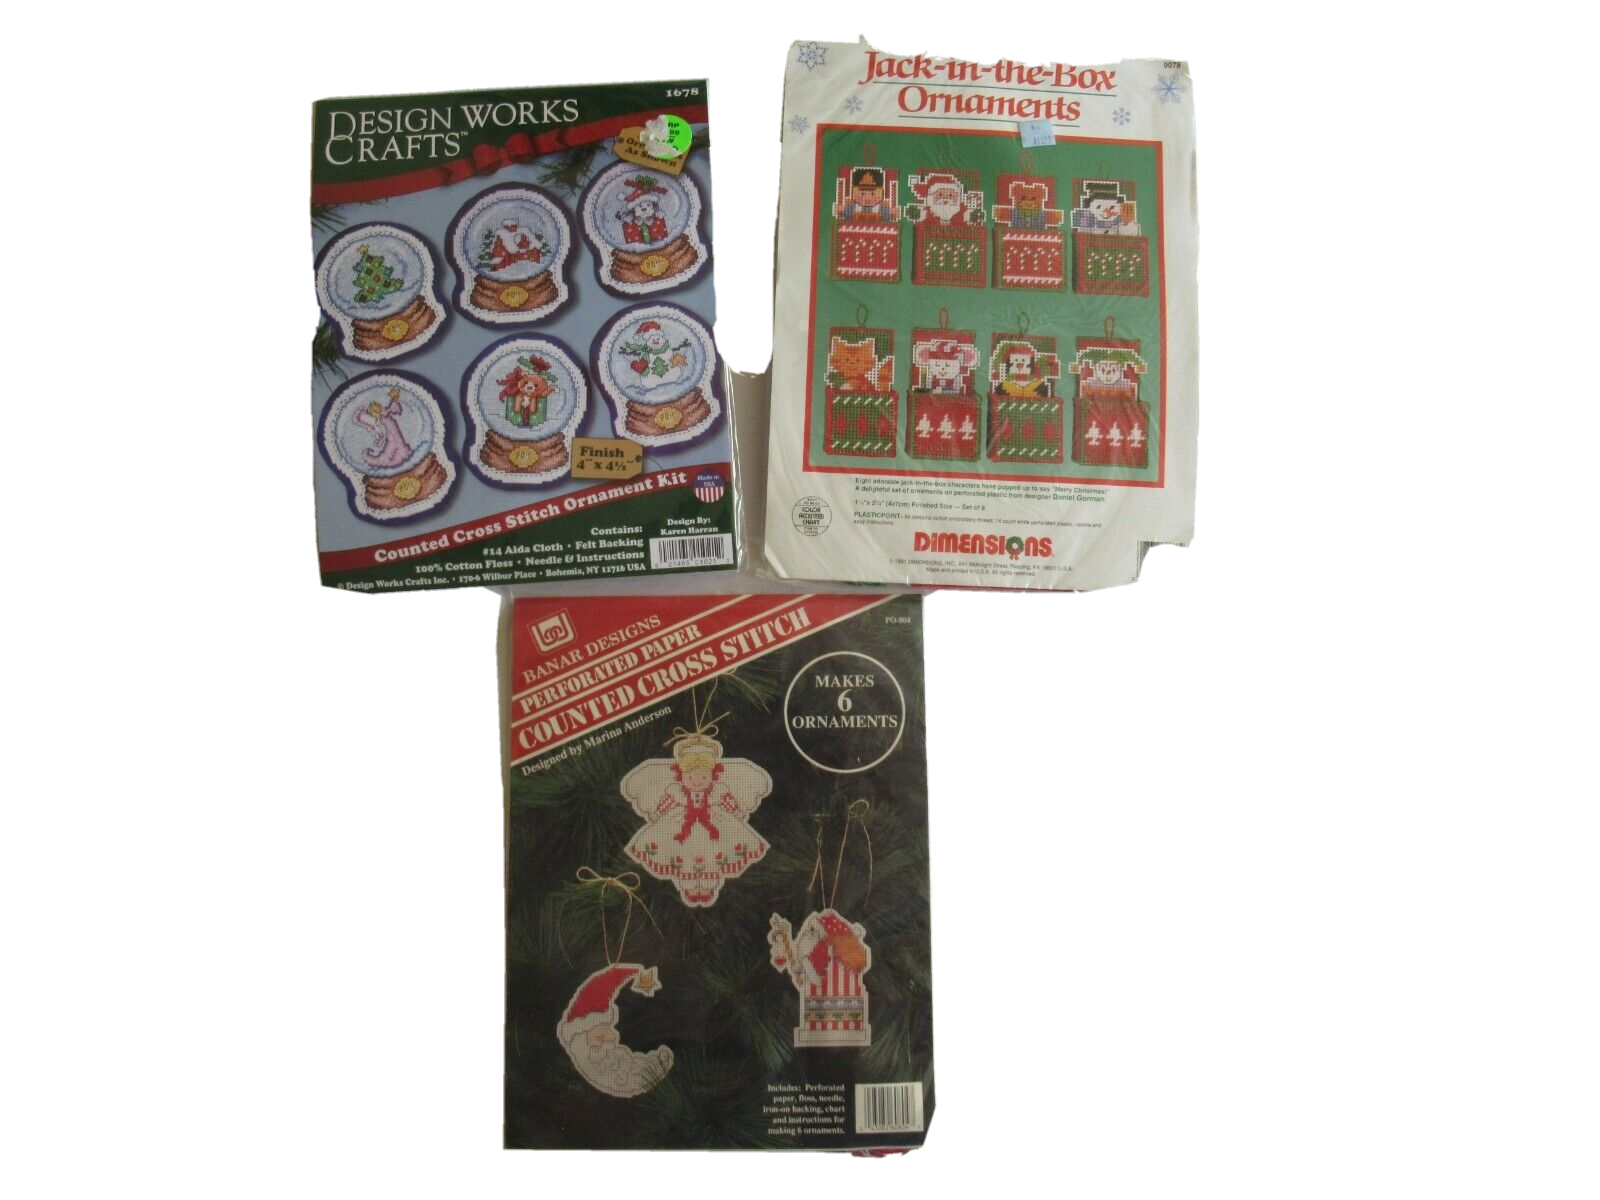 Lot 3x Dimensions JACK-IN-THE-BOX 9078 Design Works 1678 Christmas Ornament Kits - $28.49